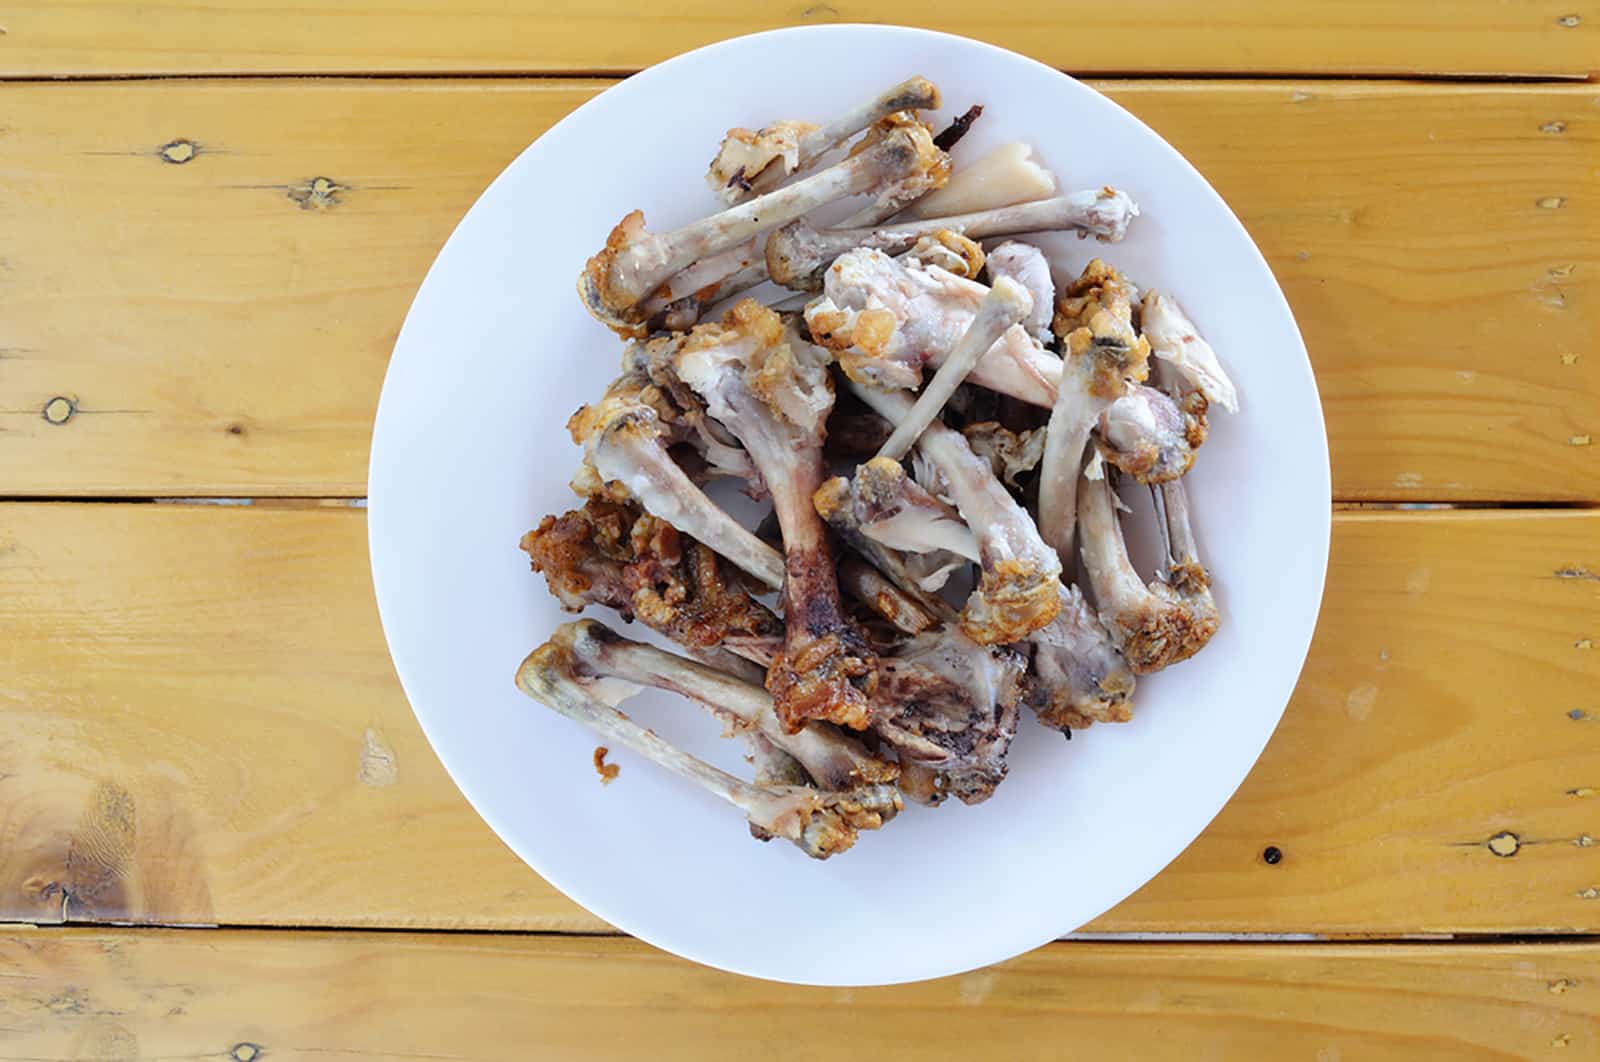 cooked bones in a plate